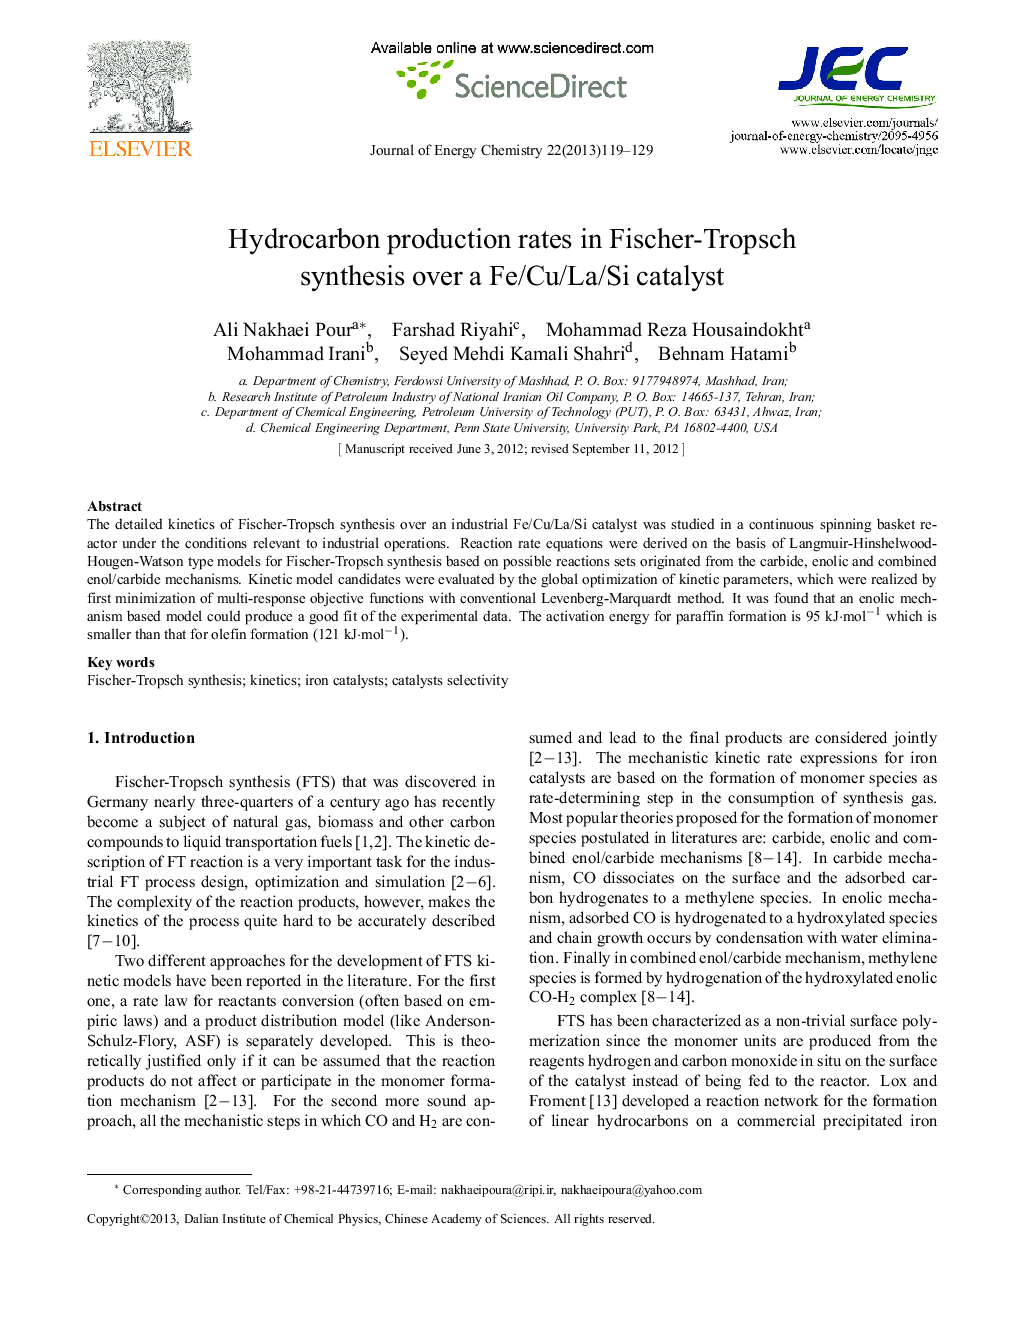 Hydrocarbon production rates in Fischer-Tropsch synthesis over a Fe/Cu/La/Si catalyst